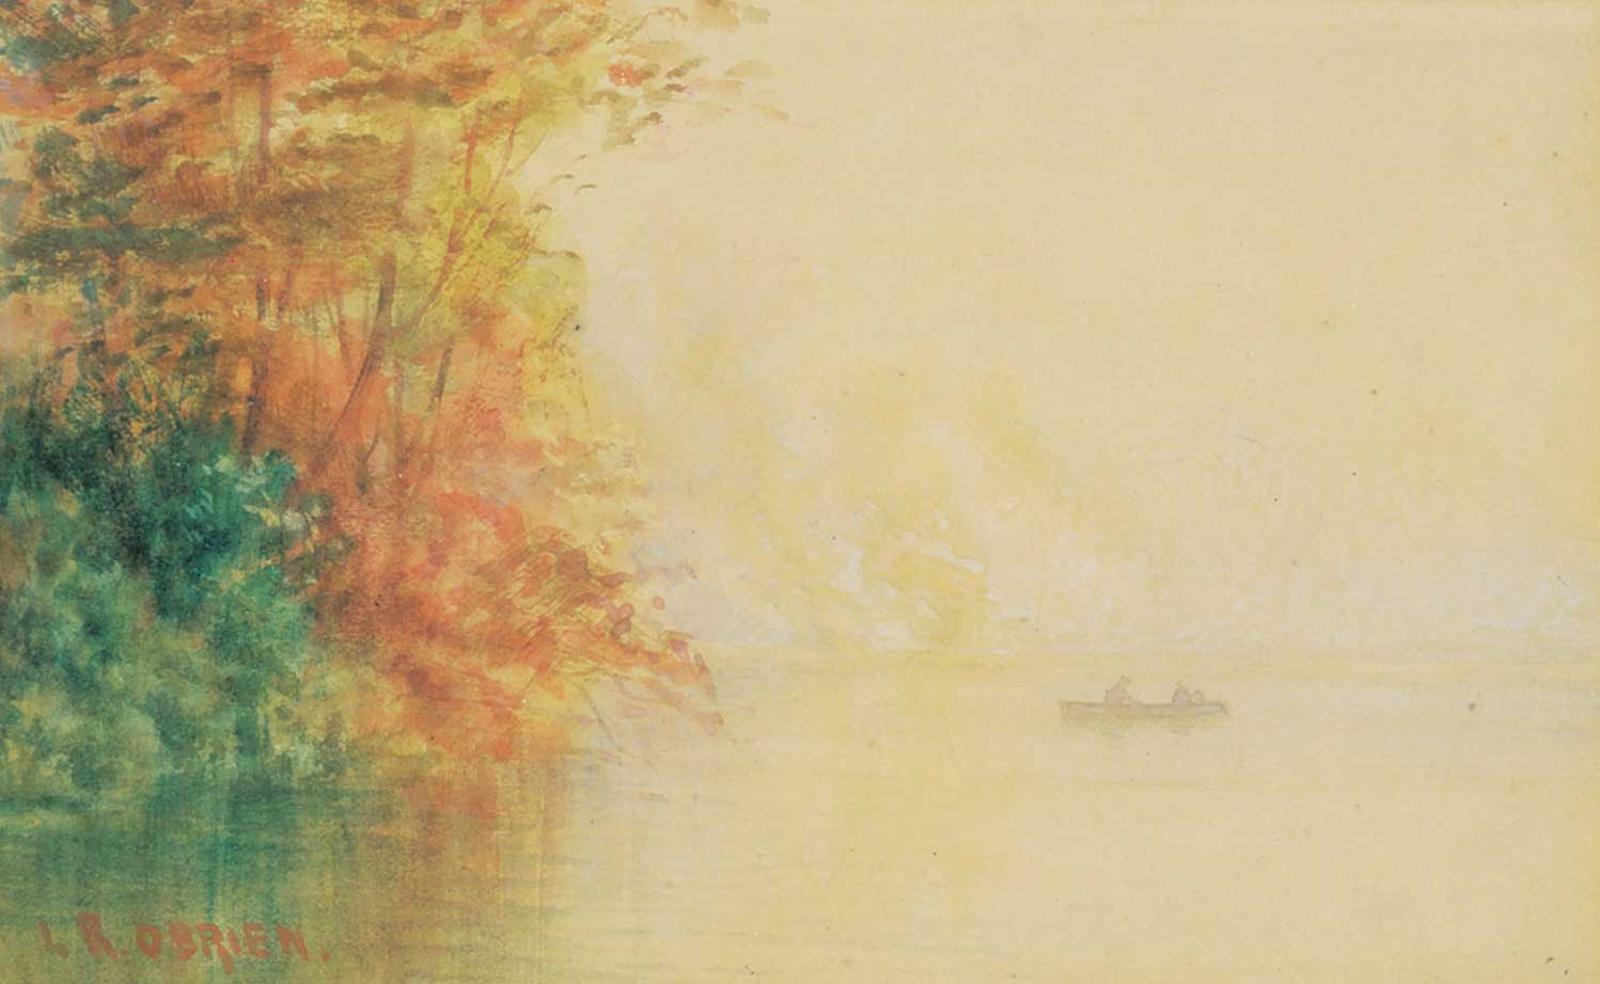 Lucius Richard O'Brien (1832-1899) - Untitled - Canoeing in the Mist